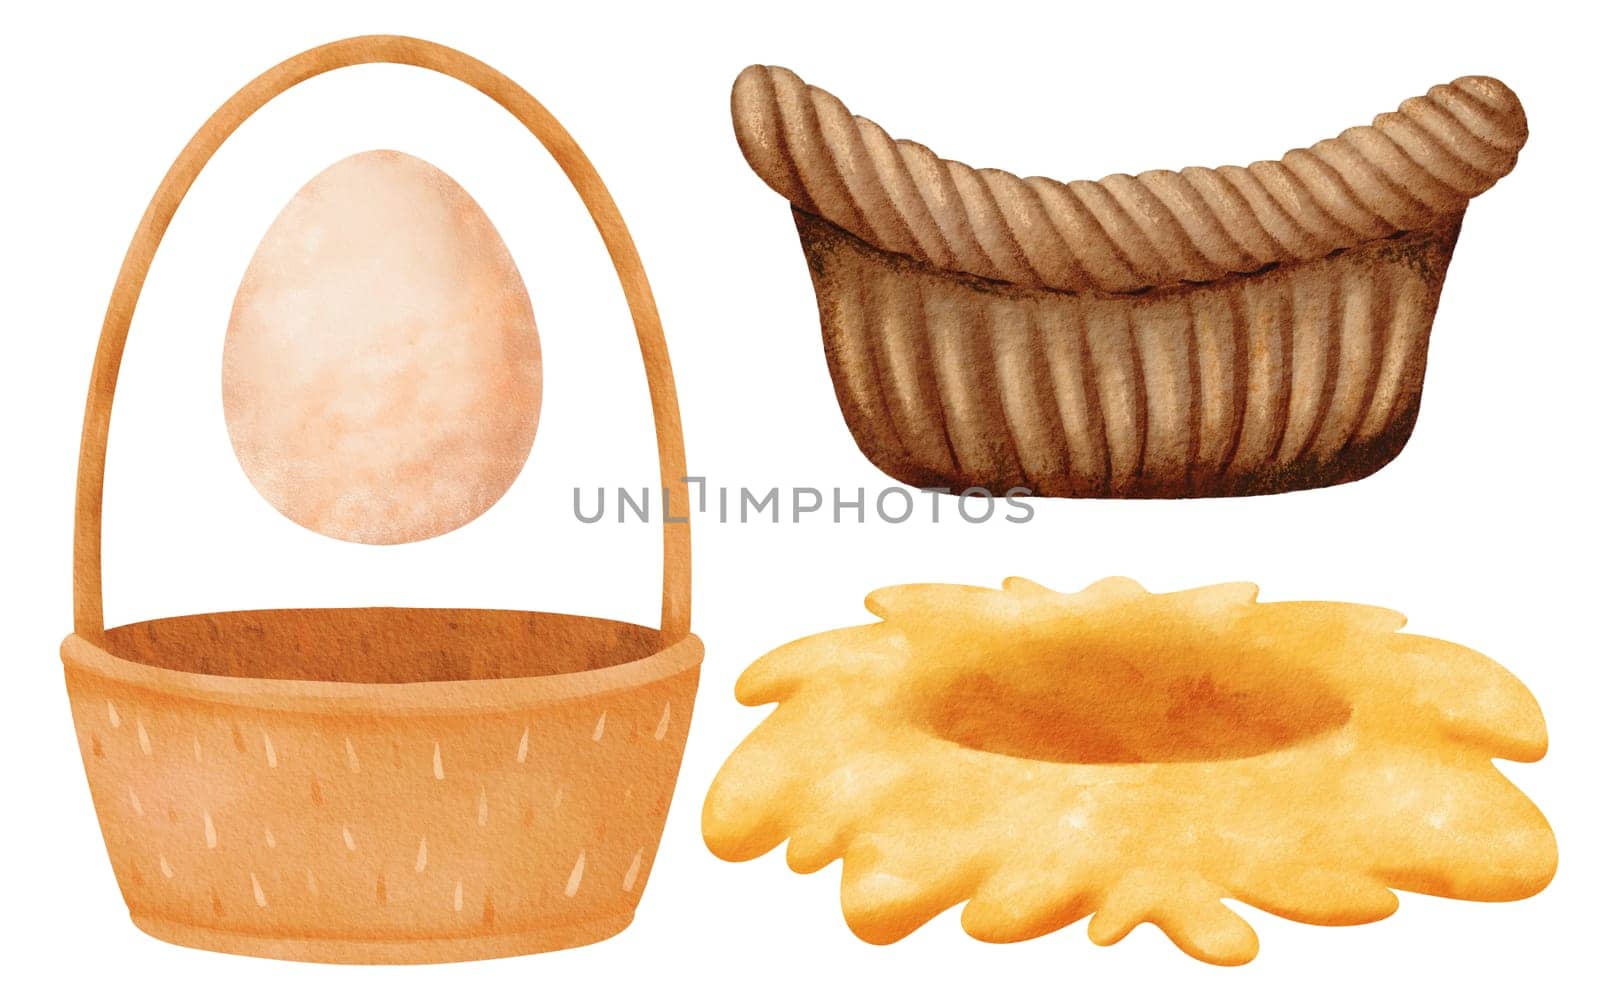 watercolor set. high-handle and handle-less baskets, a chicken egg, and a bird's nest made of straw. cartoon style. From farmhouse-themed illustrations to decorative designs, rustic elements by Art_Mari_Ka